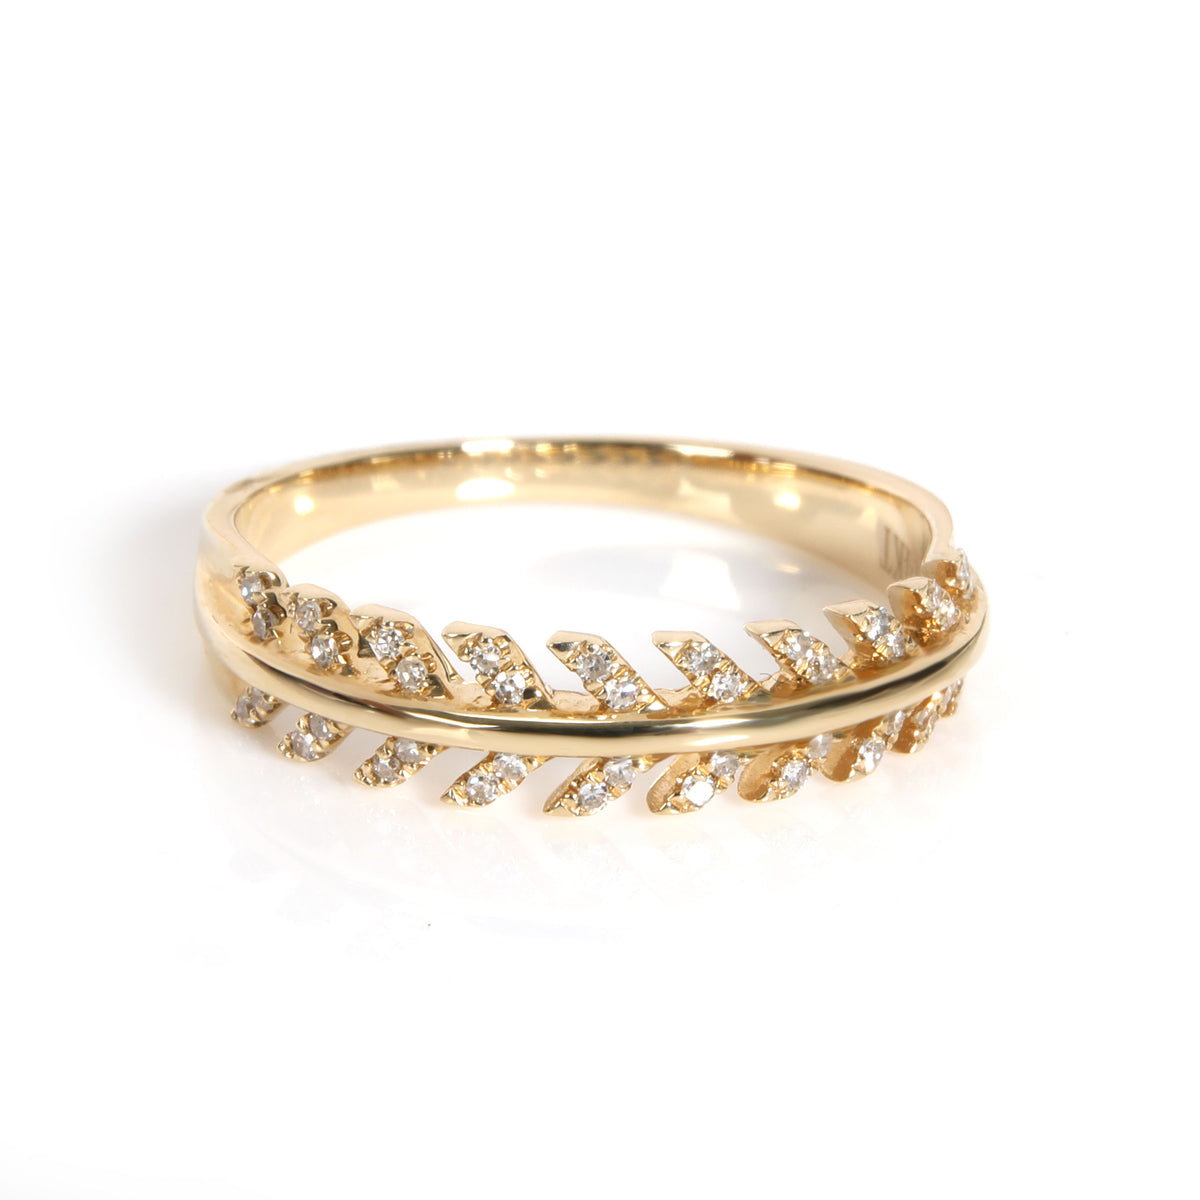 Diamond Feather Ring in 14K Yellow Gold 0.12 ctw